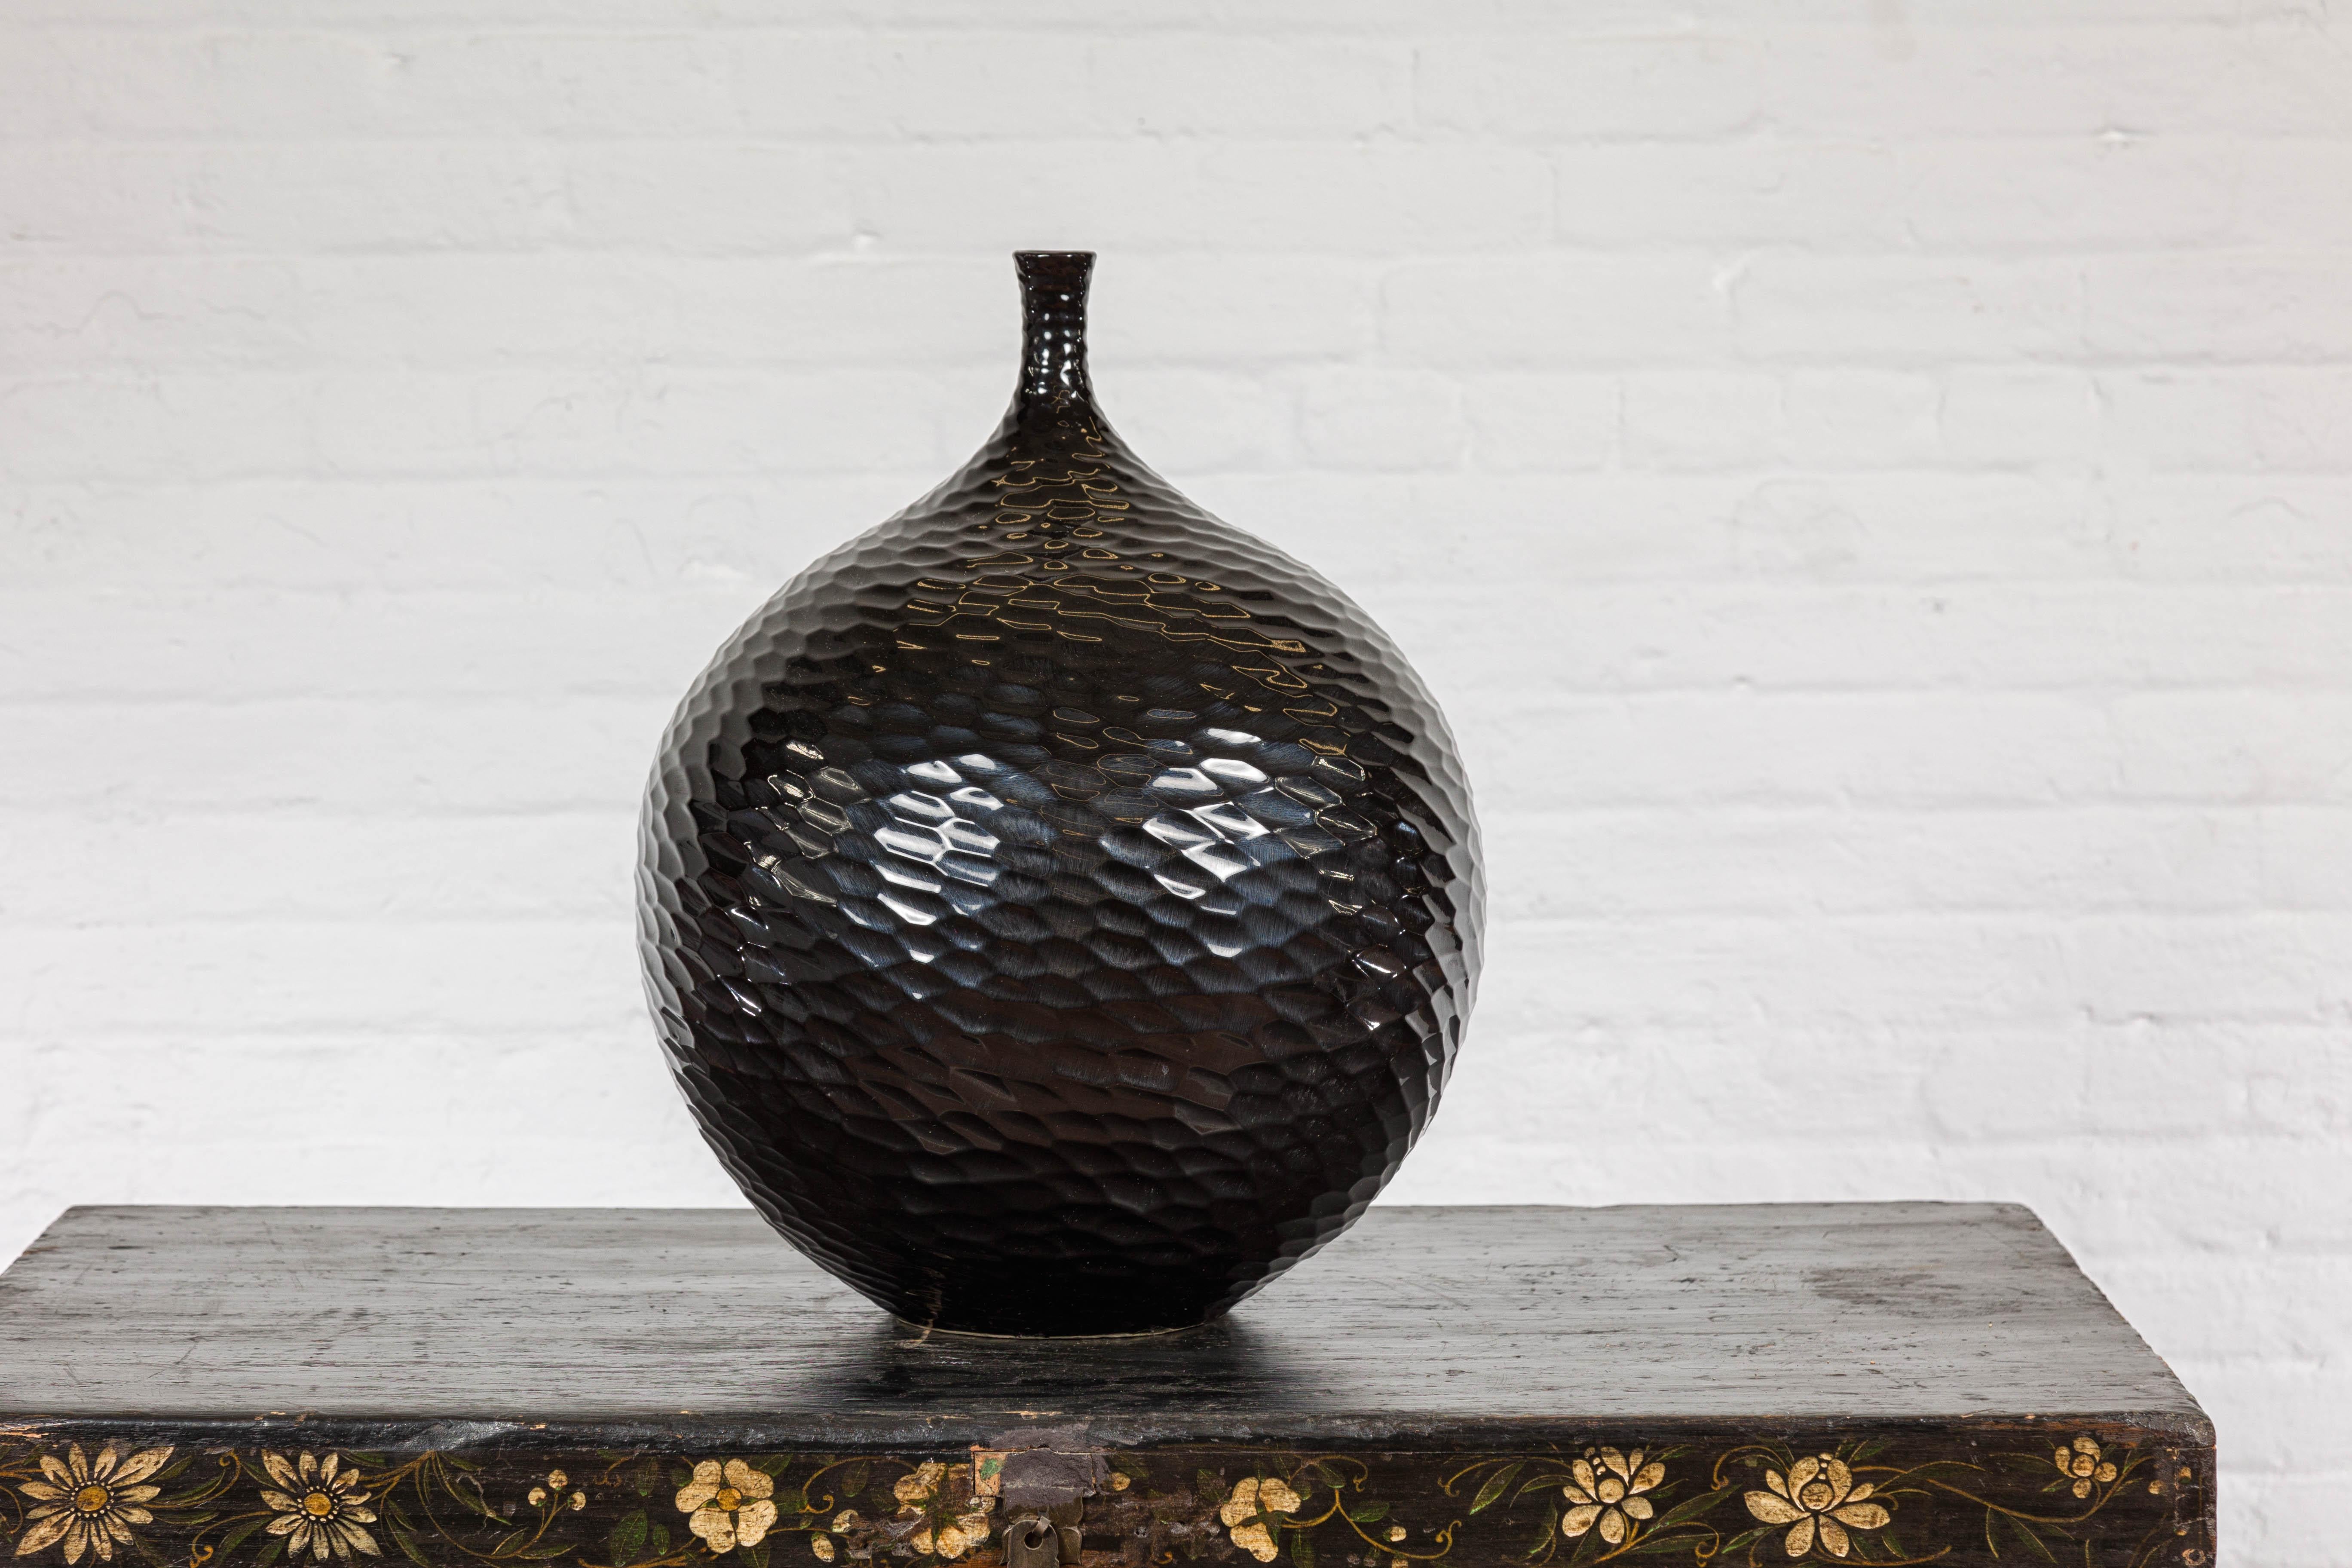 Ceramic Artisan Black Glazed Bulb Shaped Vase with Honeycomb Patterns and Narrow Mouth For Sale